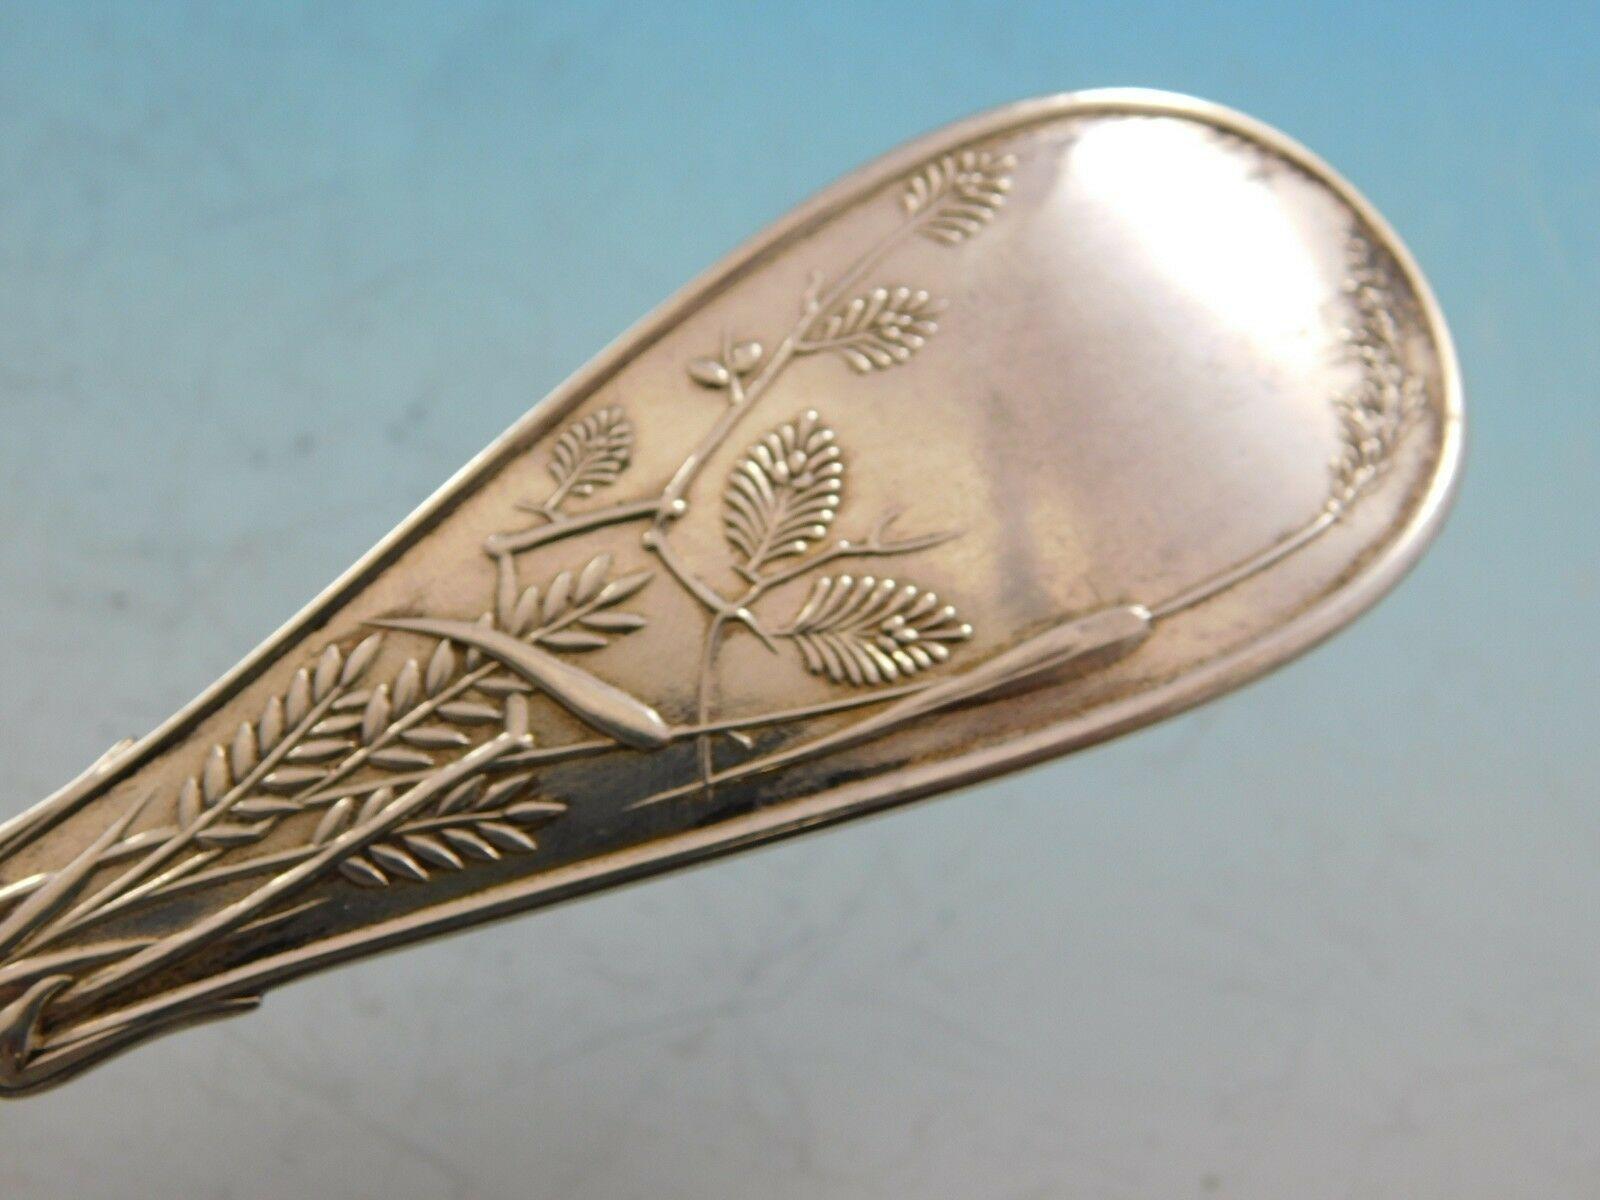 Japanese by Tiffany & Co. Sterling Silver Salad Serving Fork Bird Motif 2